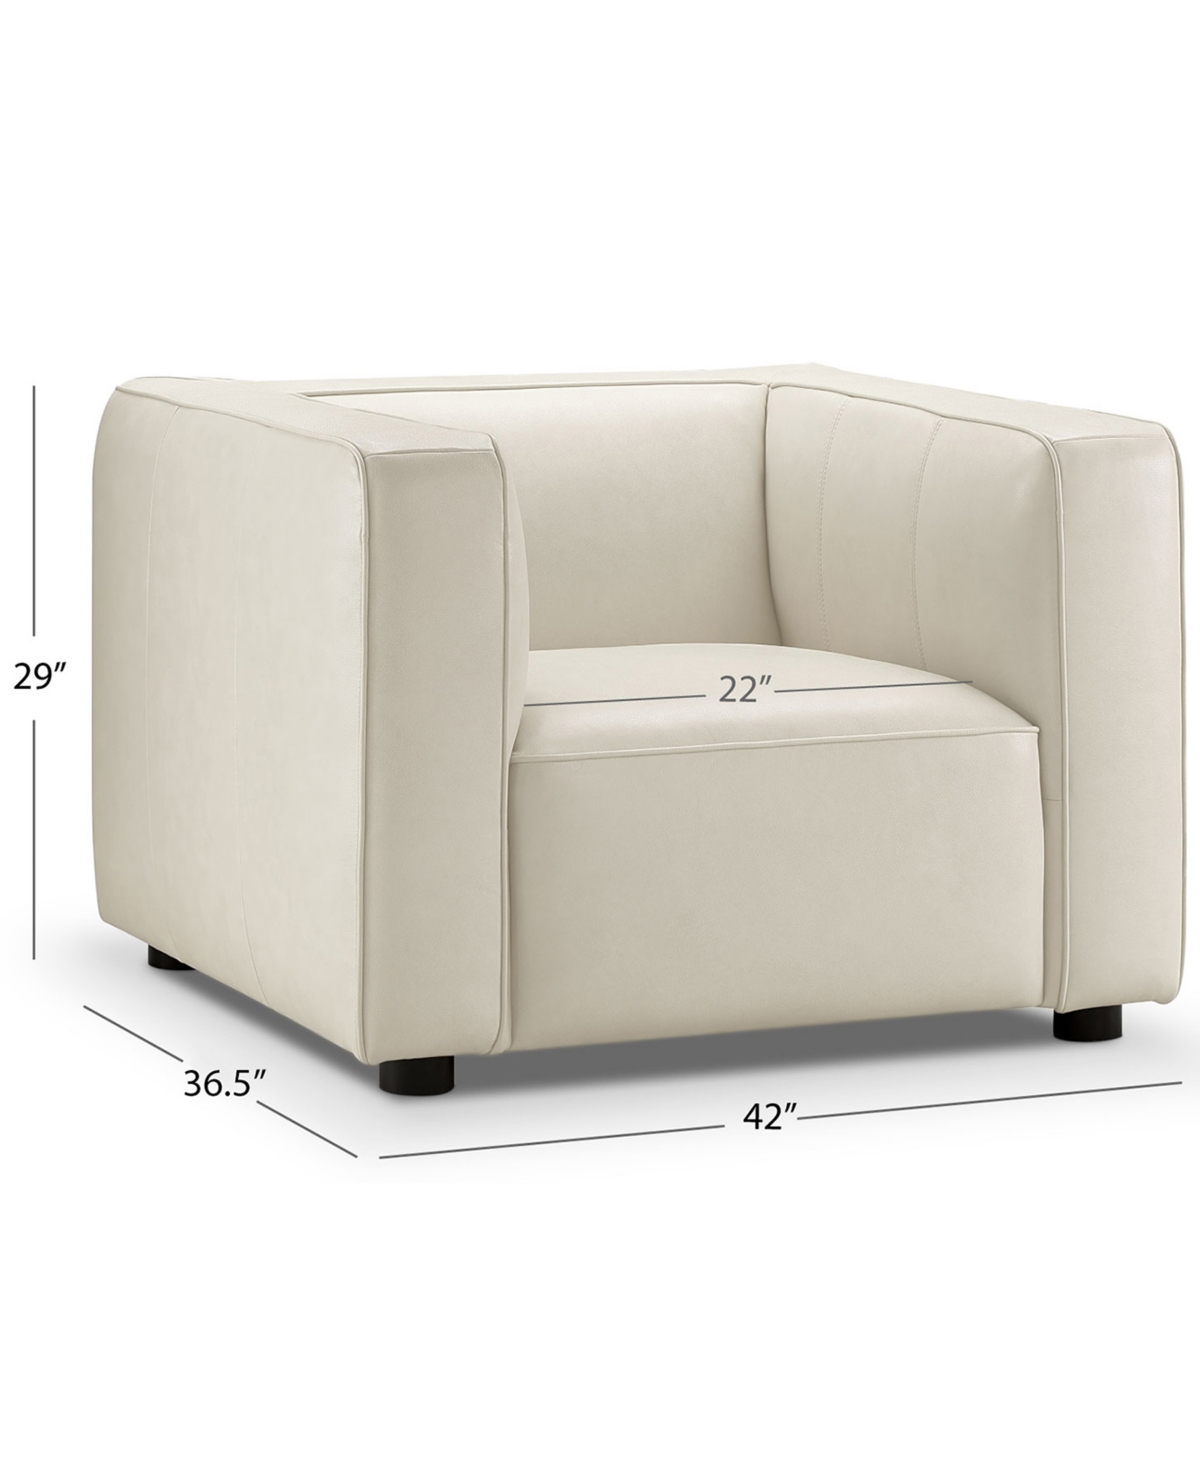 Shop Abbyson Living Blake 42" Leather Modern Deep Seat Chair In Ivory